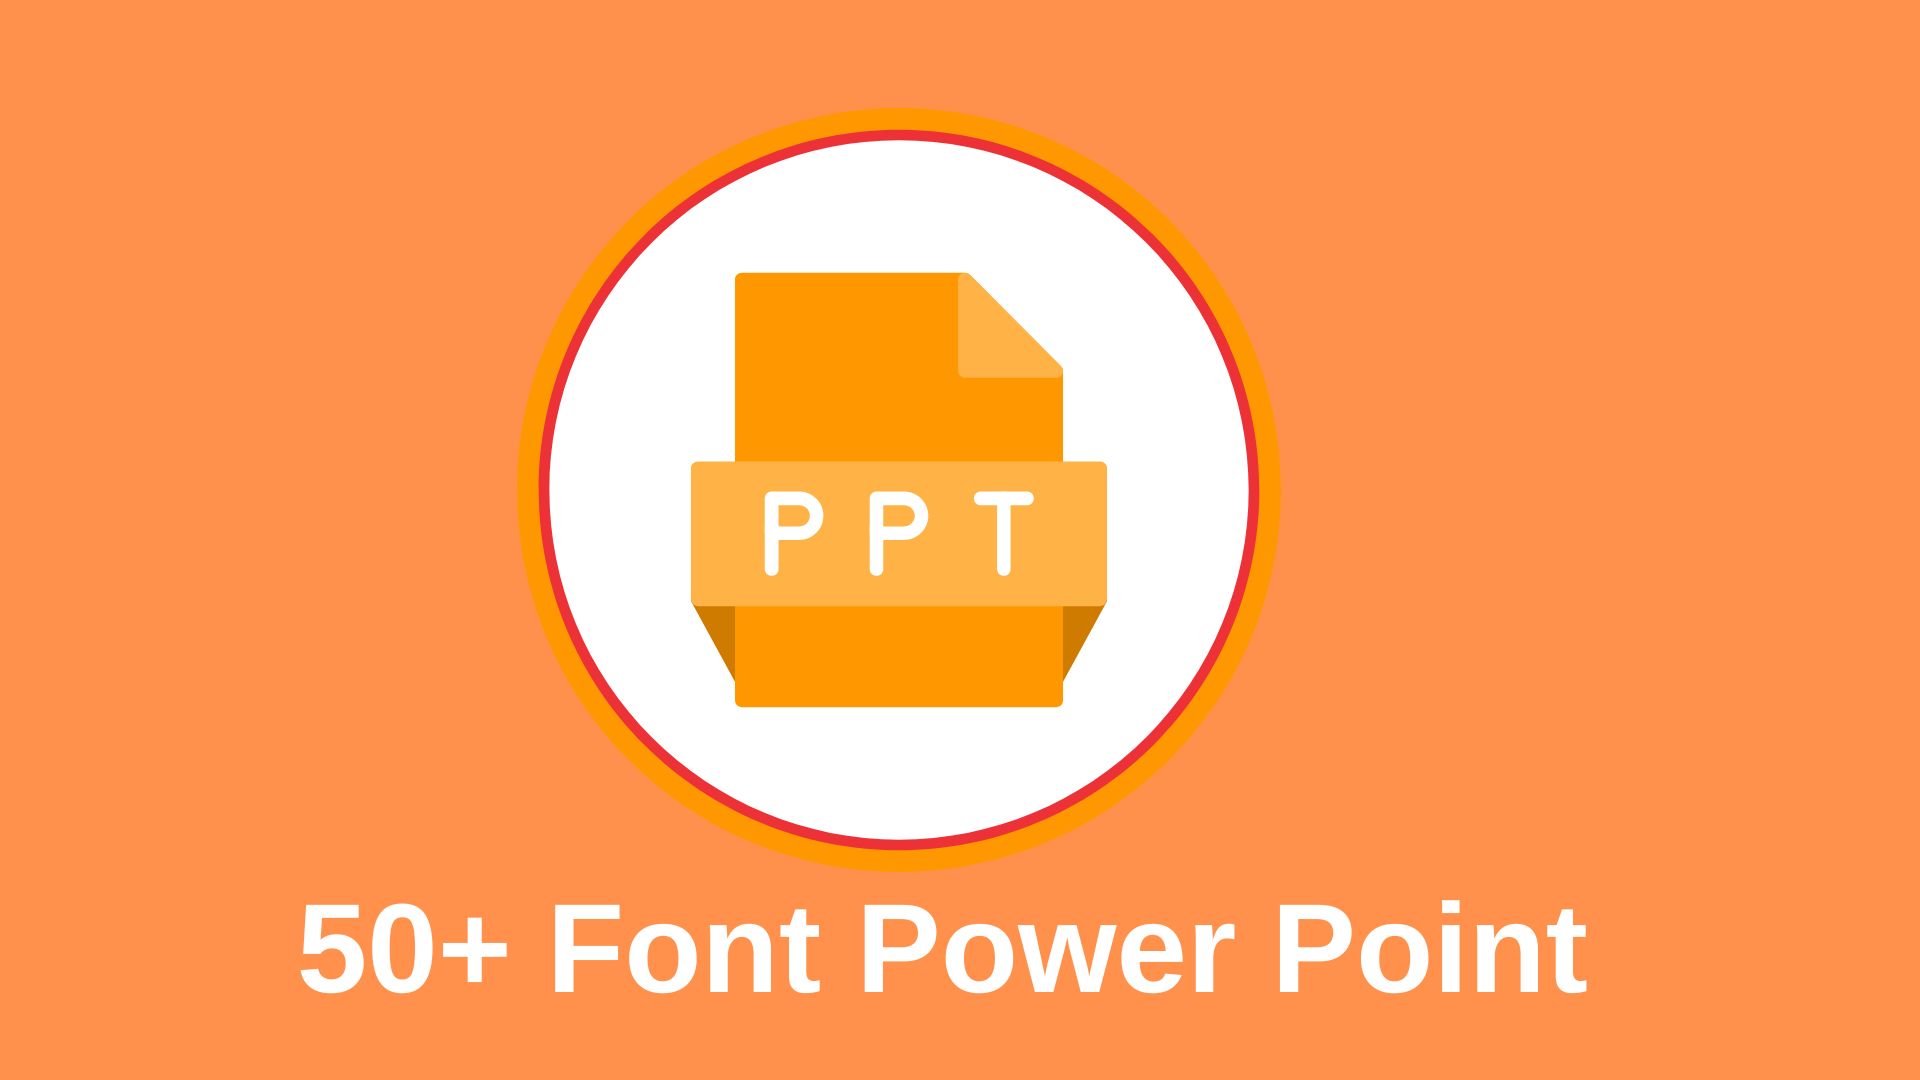 Font Power Point